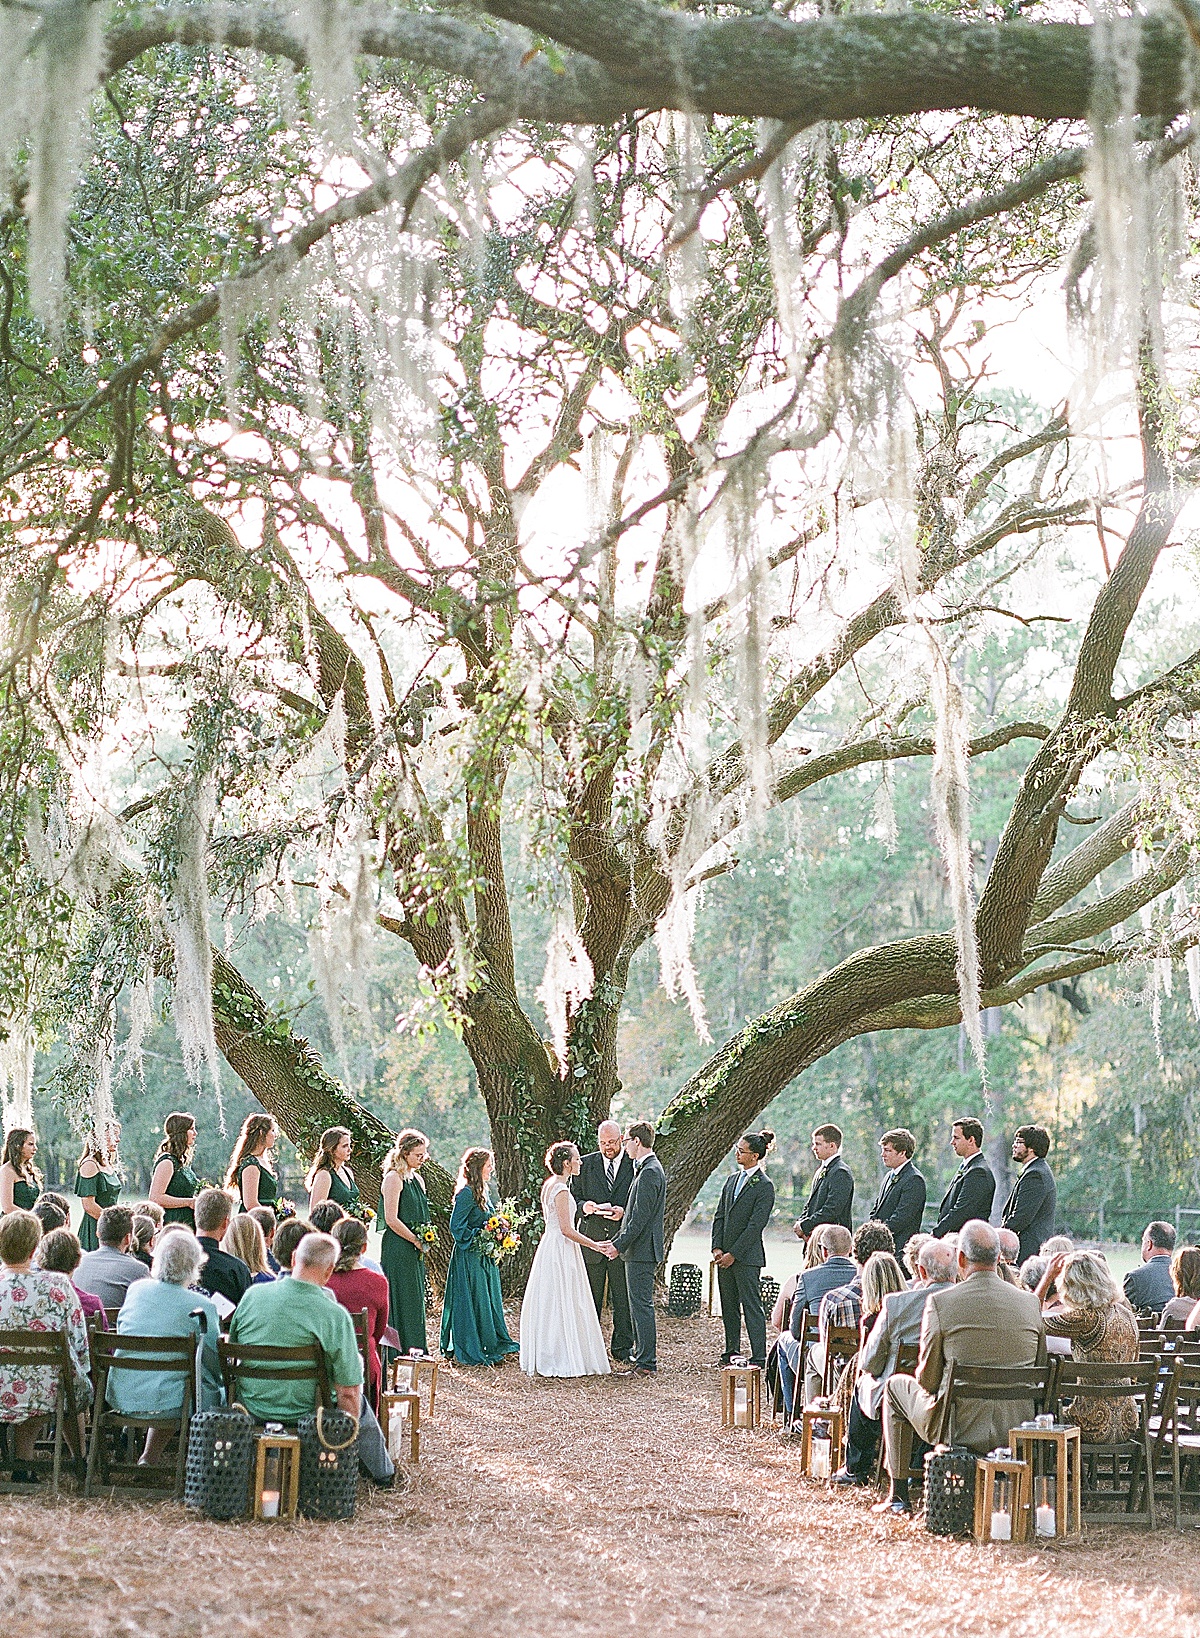 Bride and Groom Sharing Vows During Their Ceremony Under A Big Oak Tree Photo